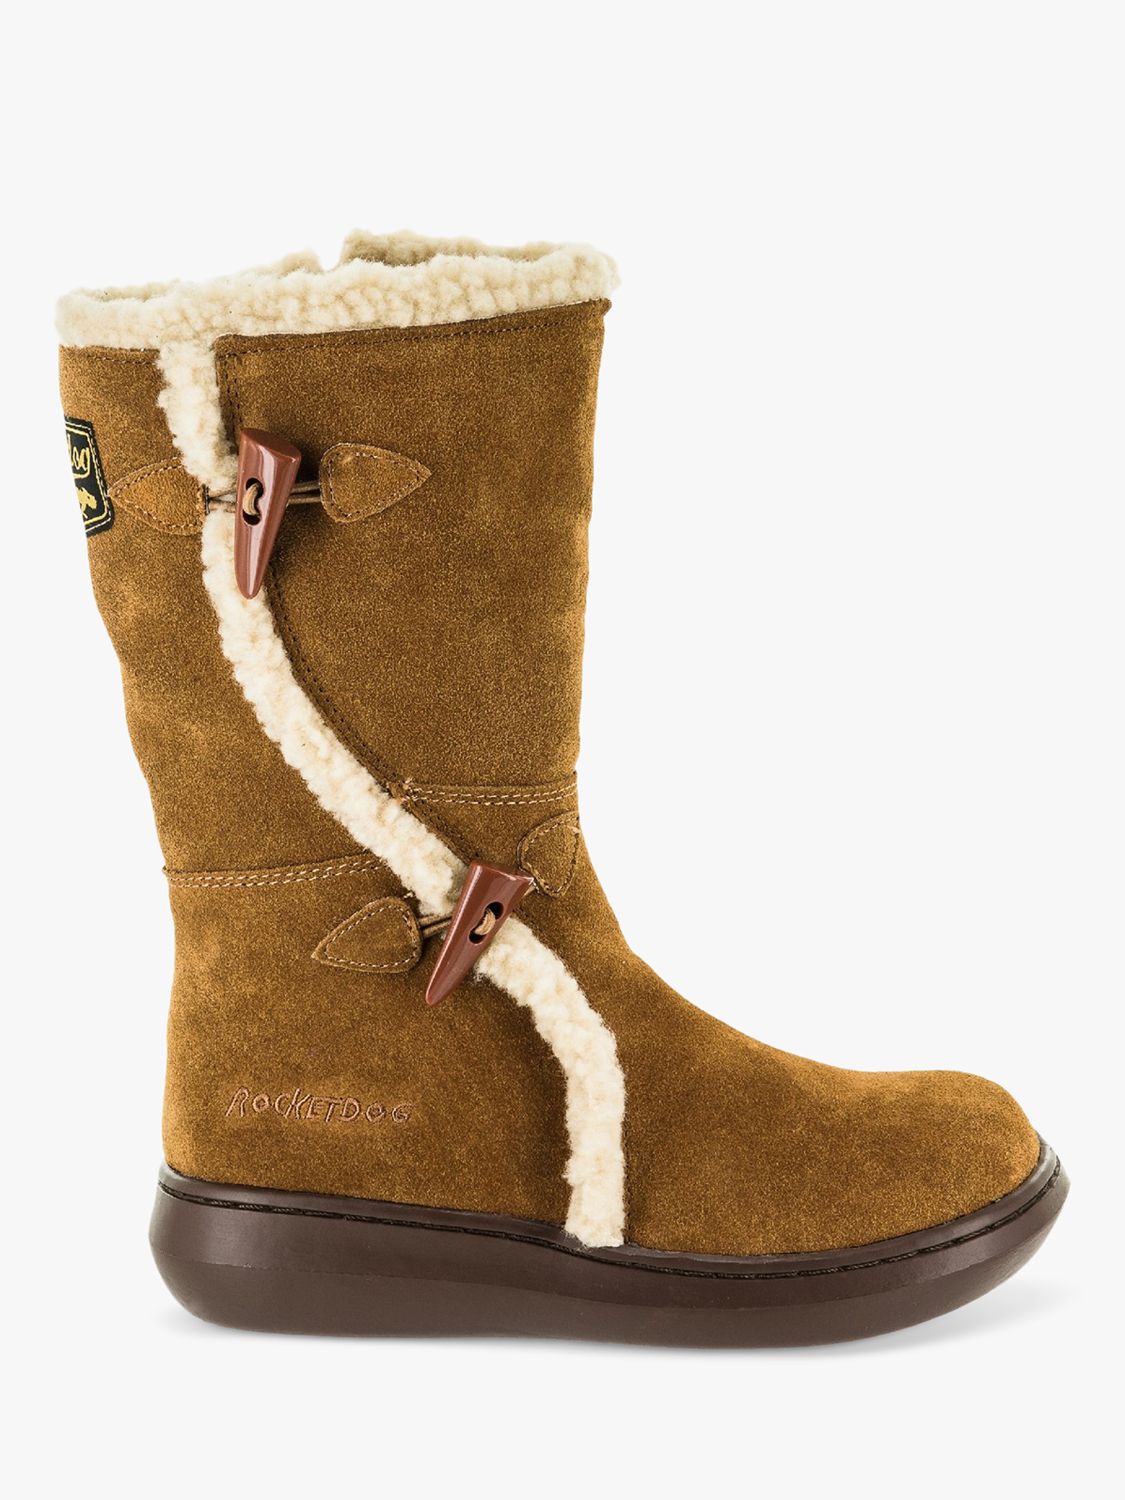 Rocket Dog Slope Suede Faux Shearling Lined Calf Boots